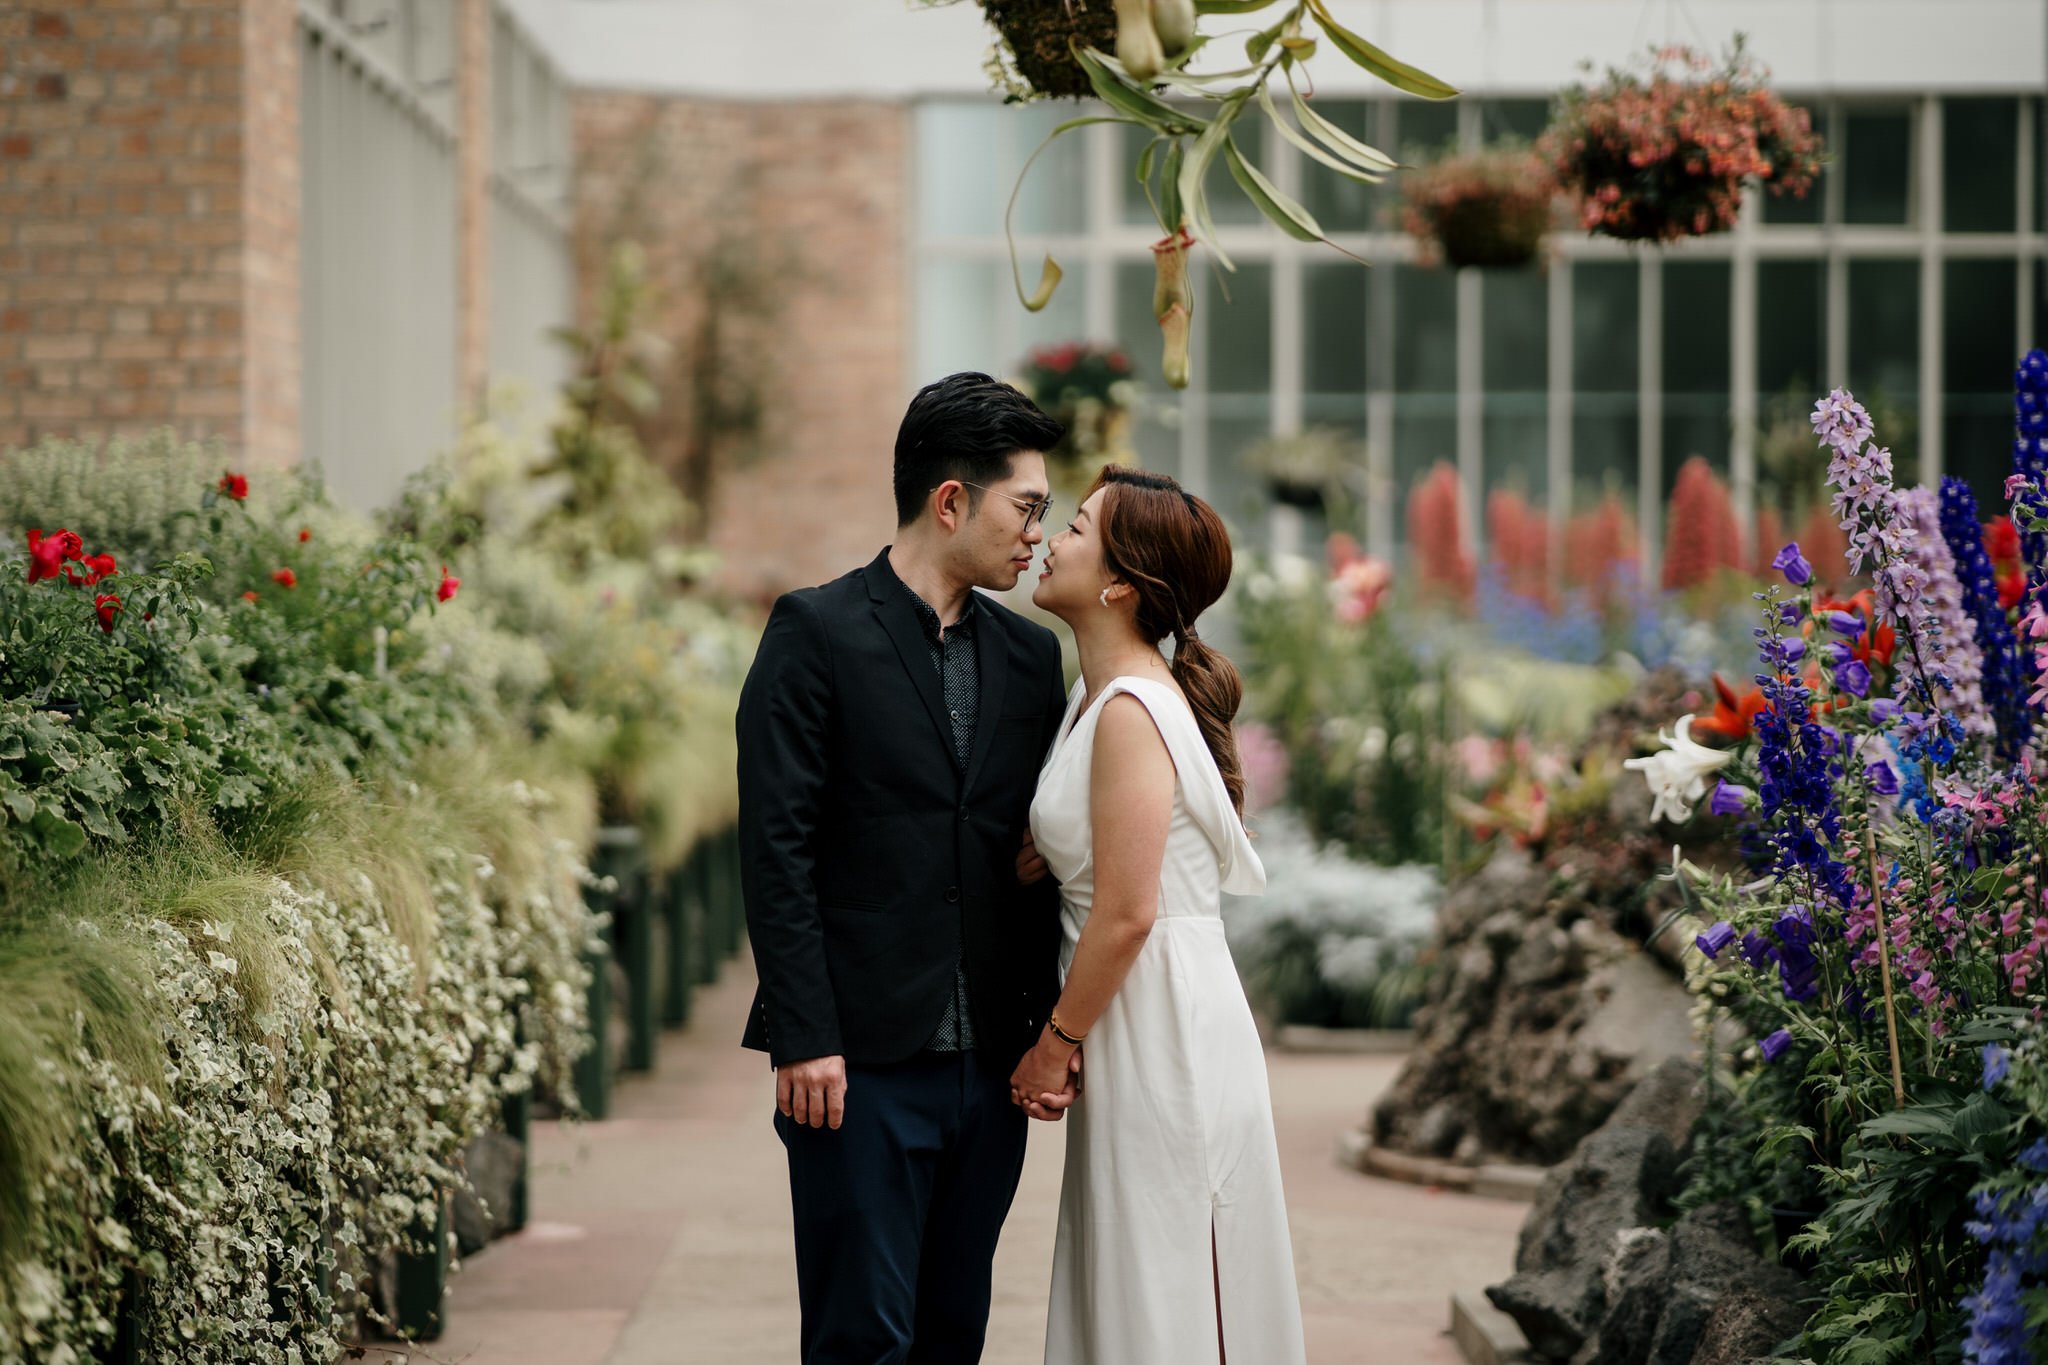 auckland-wedding-photographer-videographer-story-by-koo-koo's-jewelry-dear-white-productions-pre-wedding-engagement-photo-glass-house-botanic-fernery-garden (4).JPG